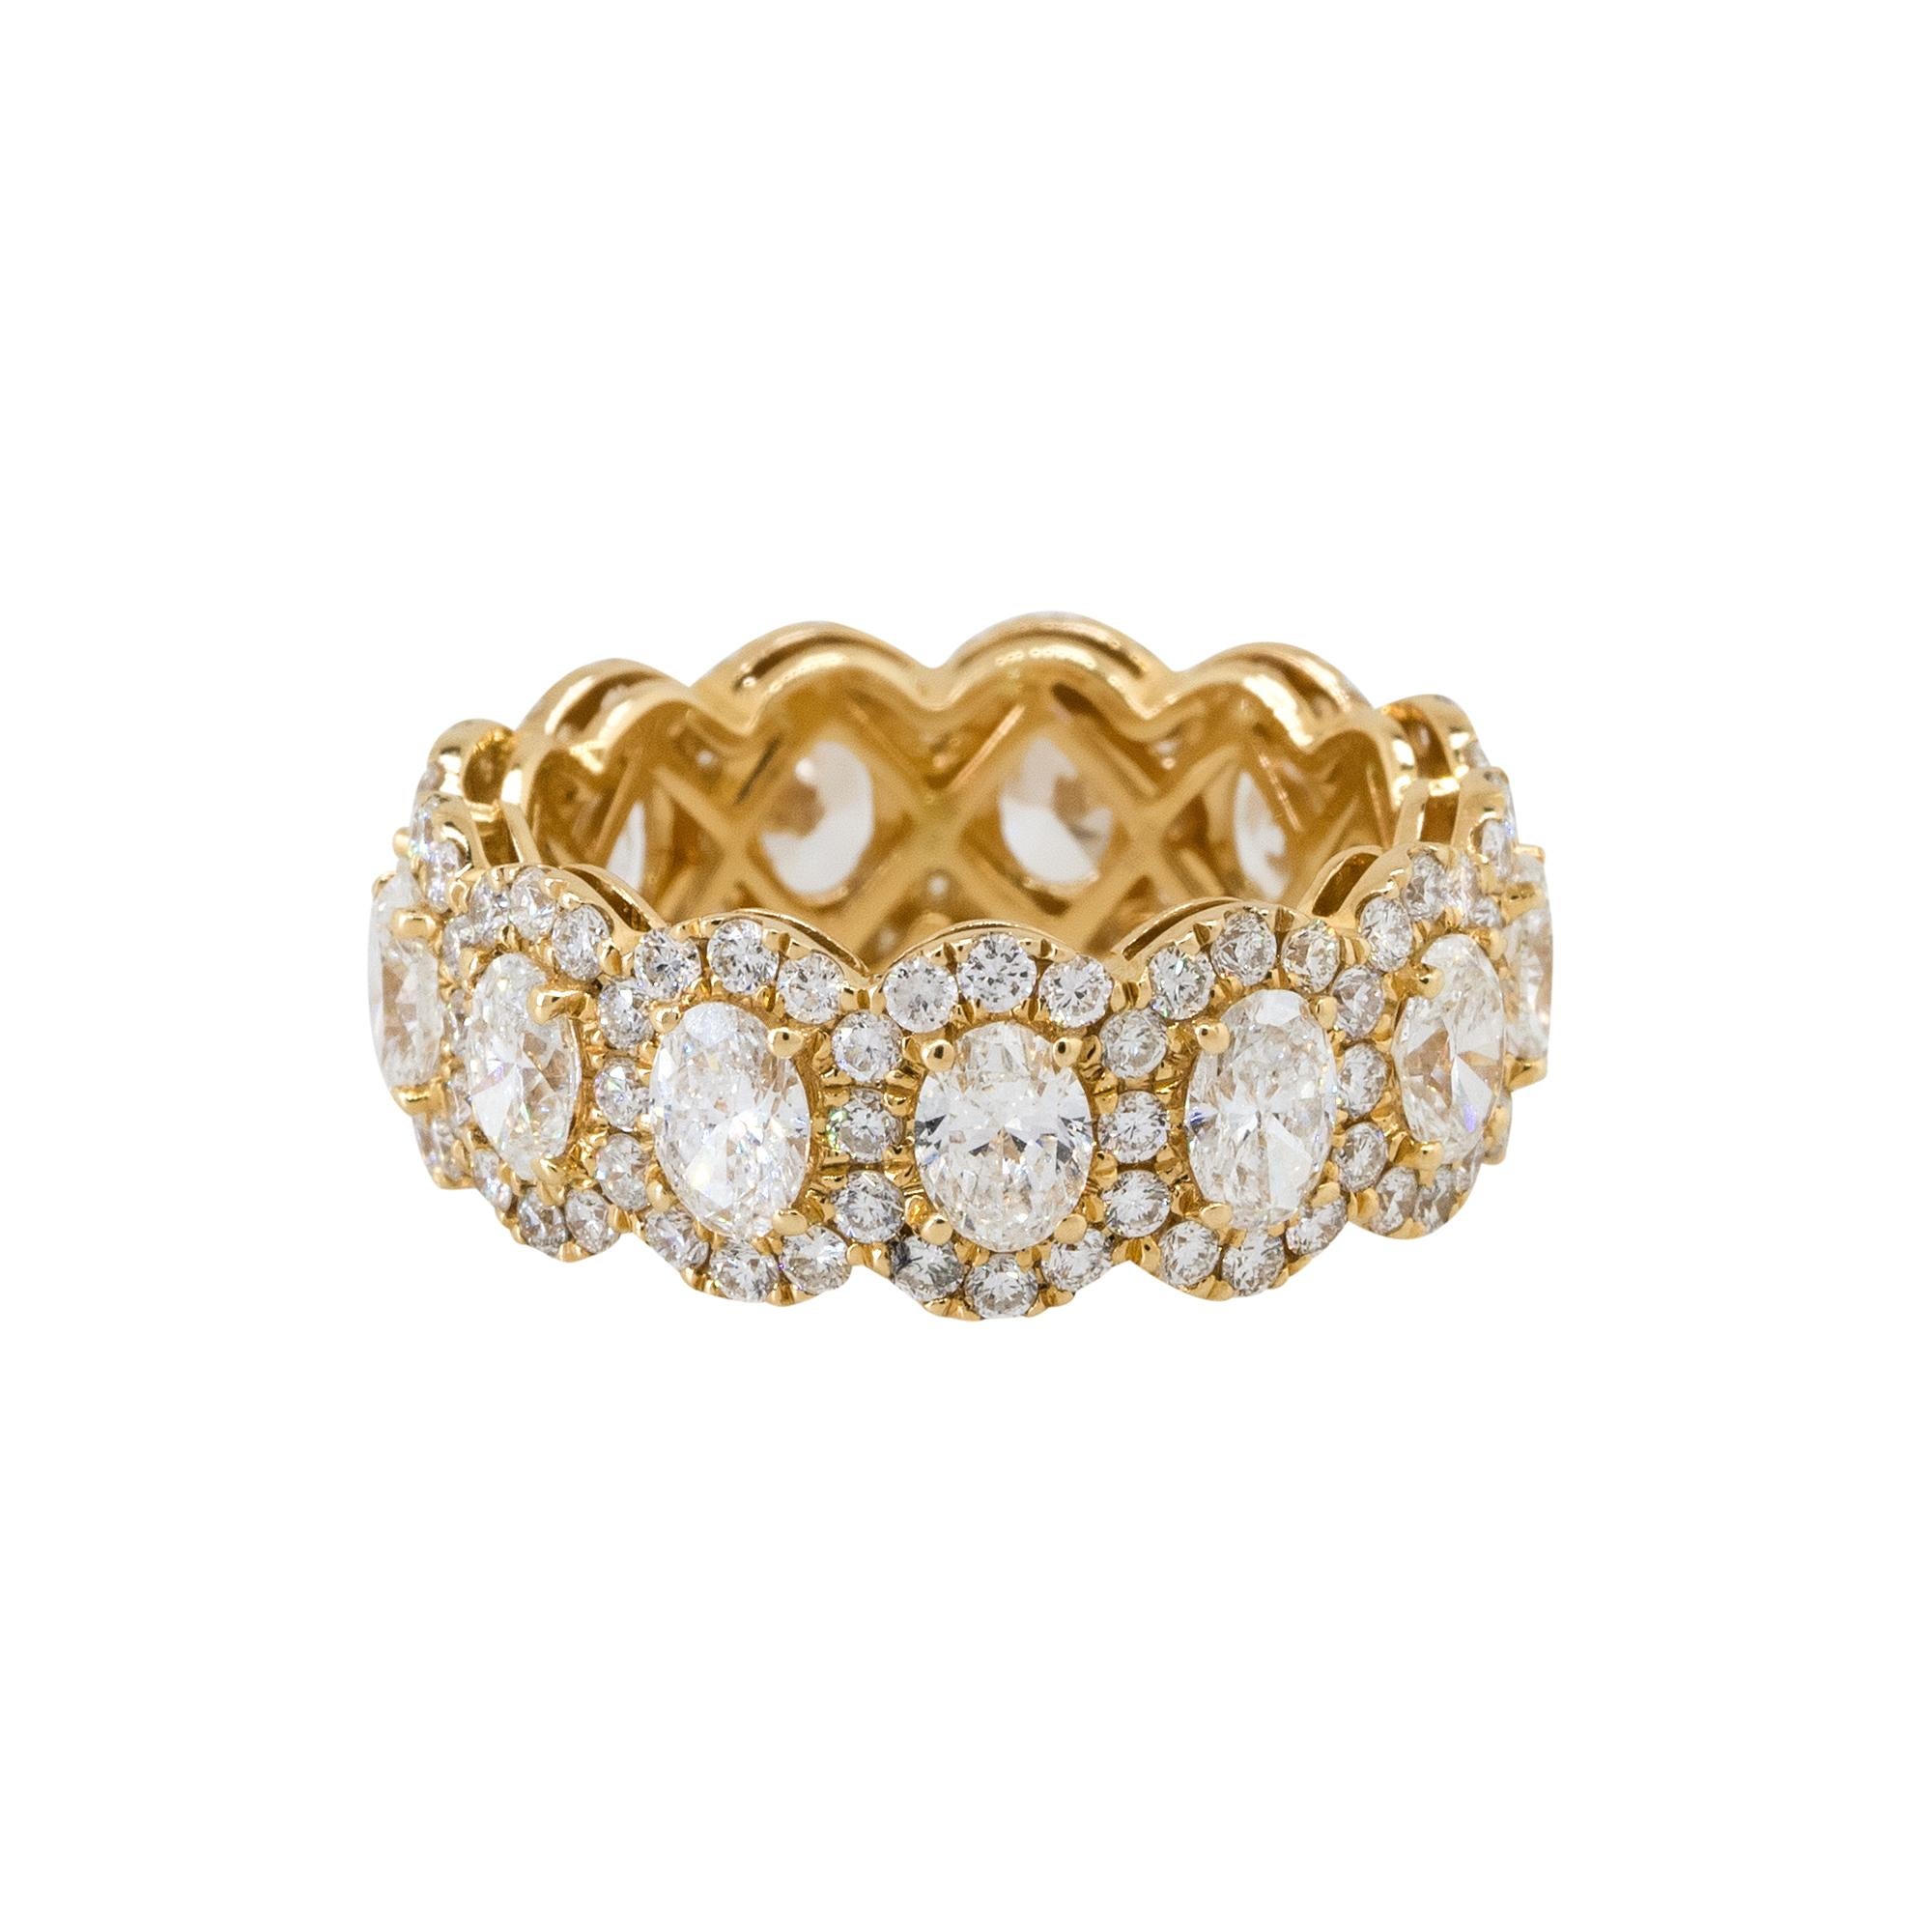 18k Yellow Gold 4.21ctw Oval & Round Diamond Scalloped Eternity Band

Material: 18k Yellow Gold
Diamond Details: Approximately 2.69ctw of Oval Cut Diamonds. Approximately 1.52ctw of Round Cut Diamonds. Diamonds are G/H in Color and VS in